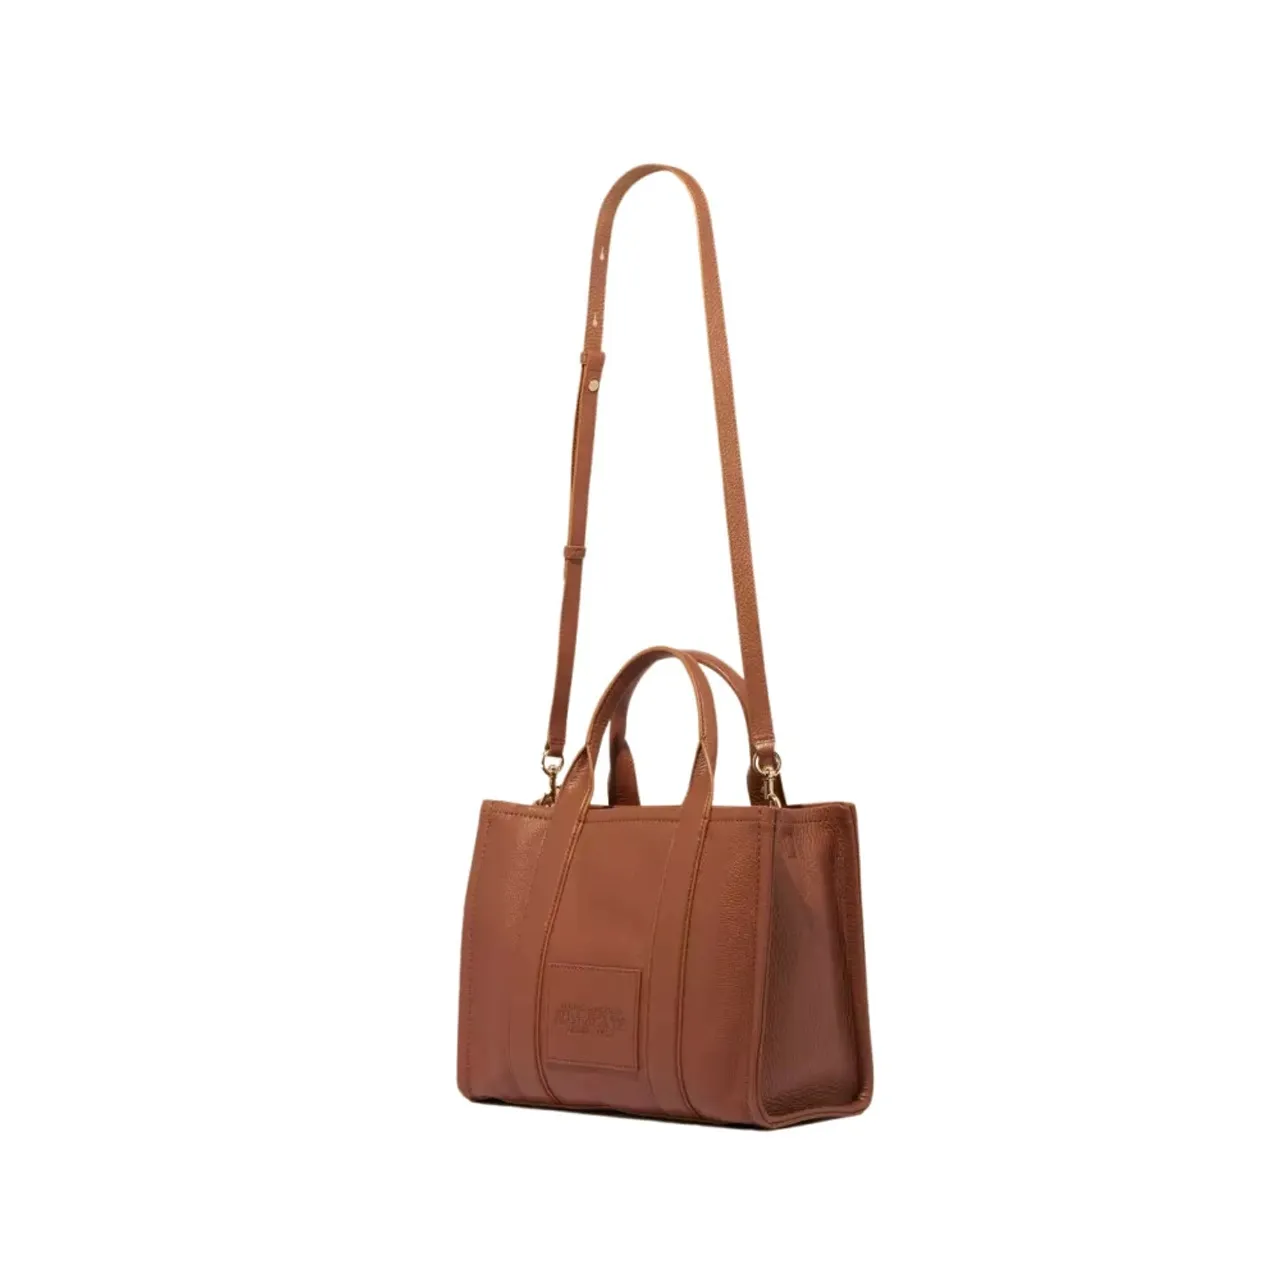 The Leather Medium Tote Bag Marc Jacobs